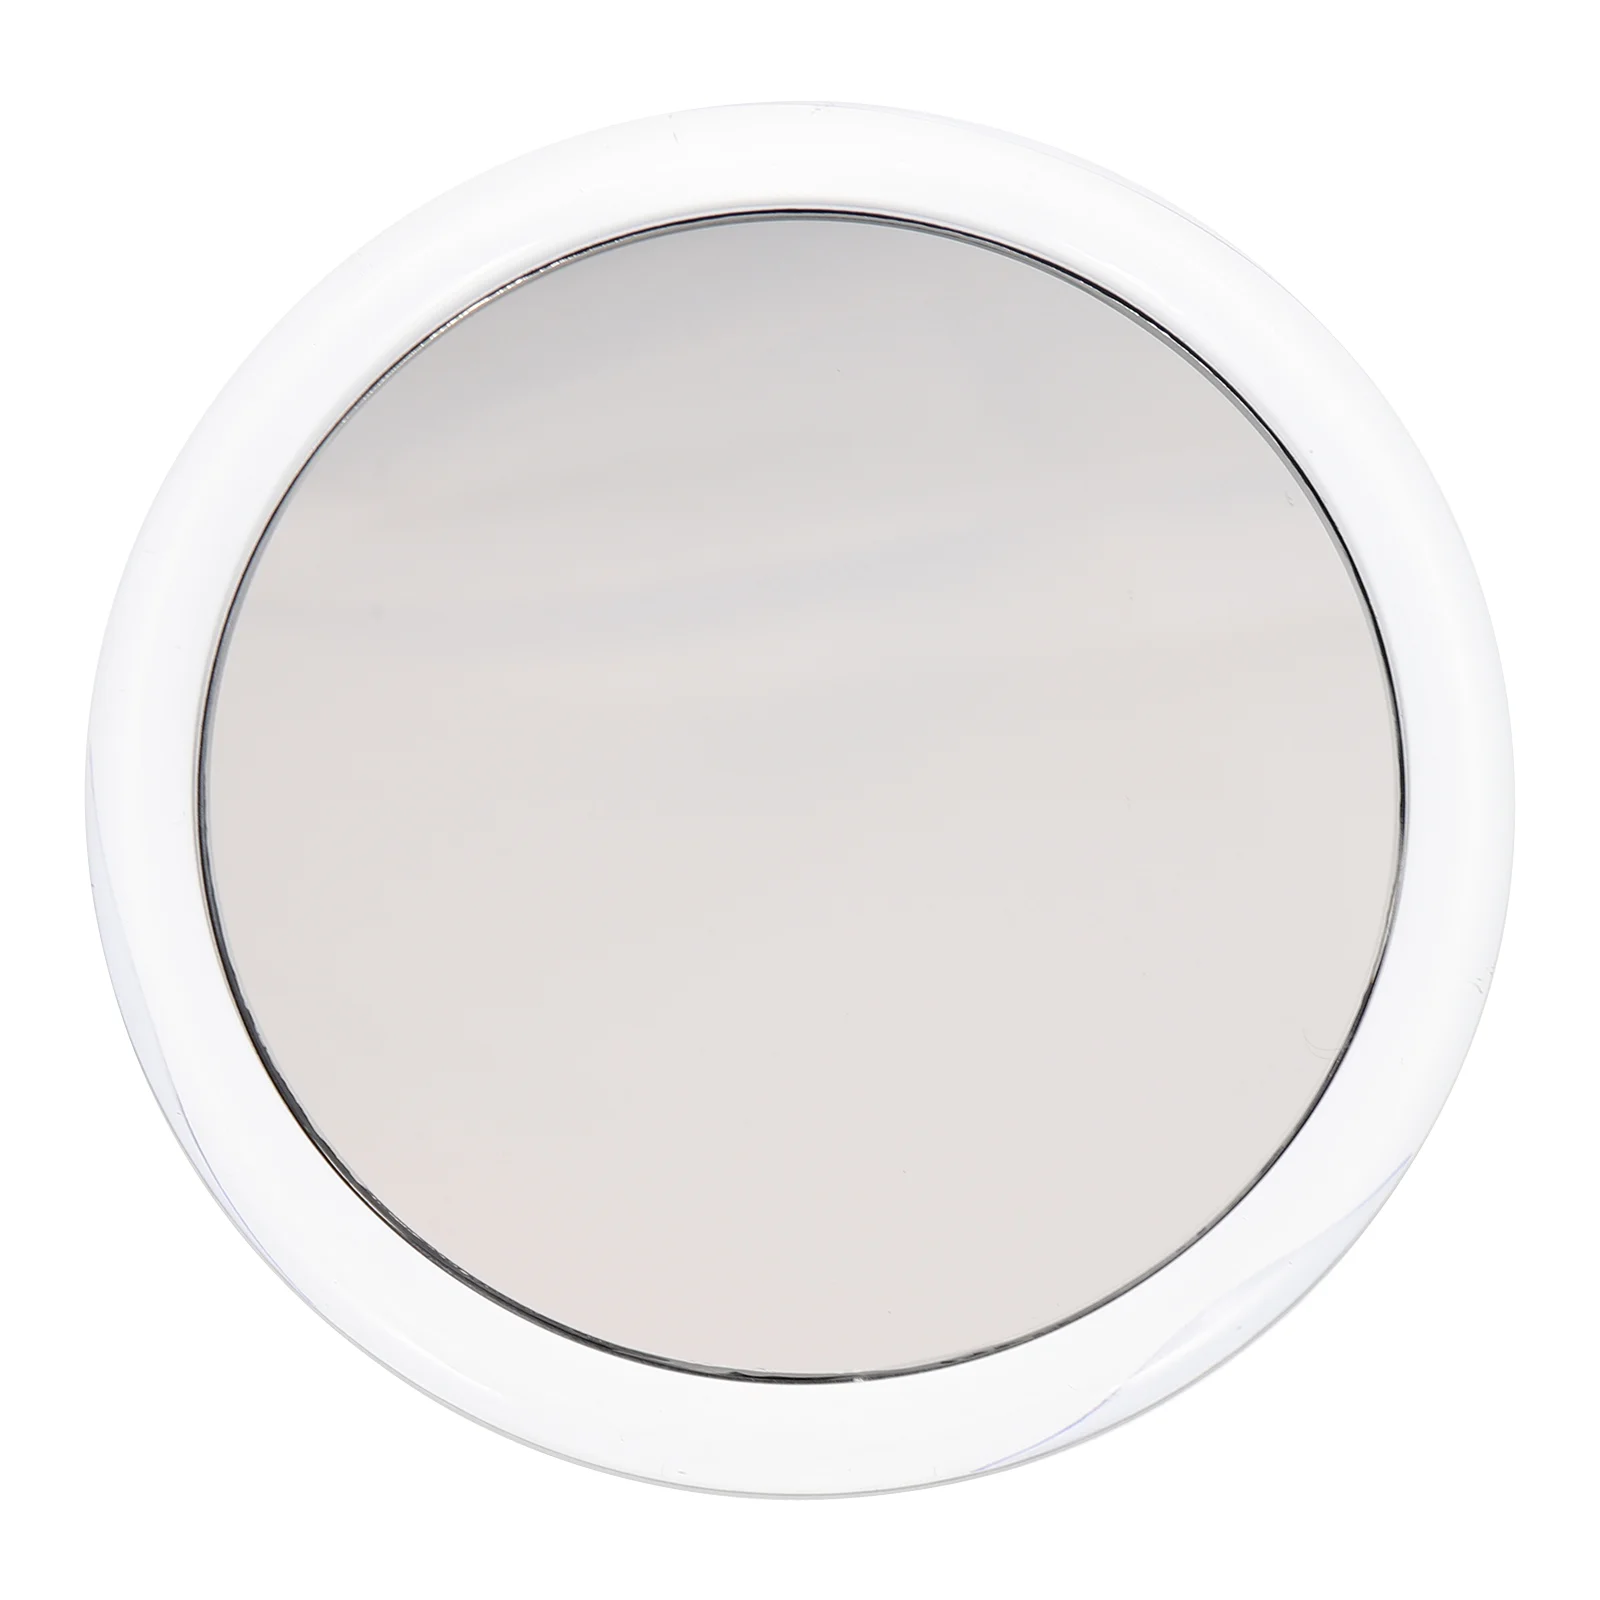 

Mirror Magnifying Suctionmakeup Cup 20X Bathroomtravelround Small Vanity Mini Wall Mirrors Pocket Folding Beautymakecups